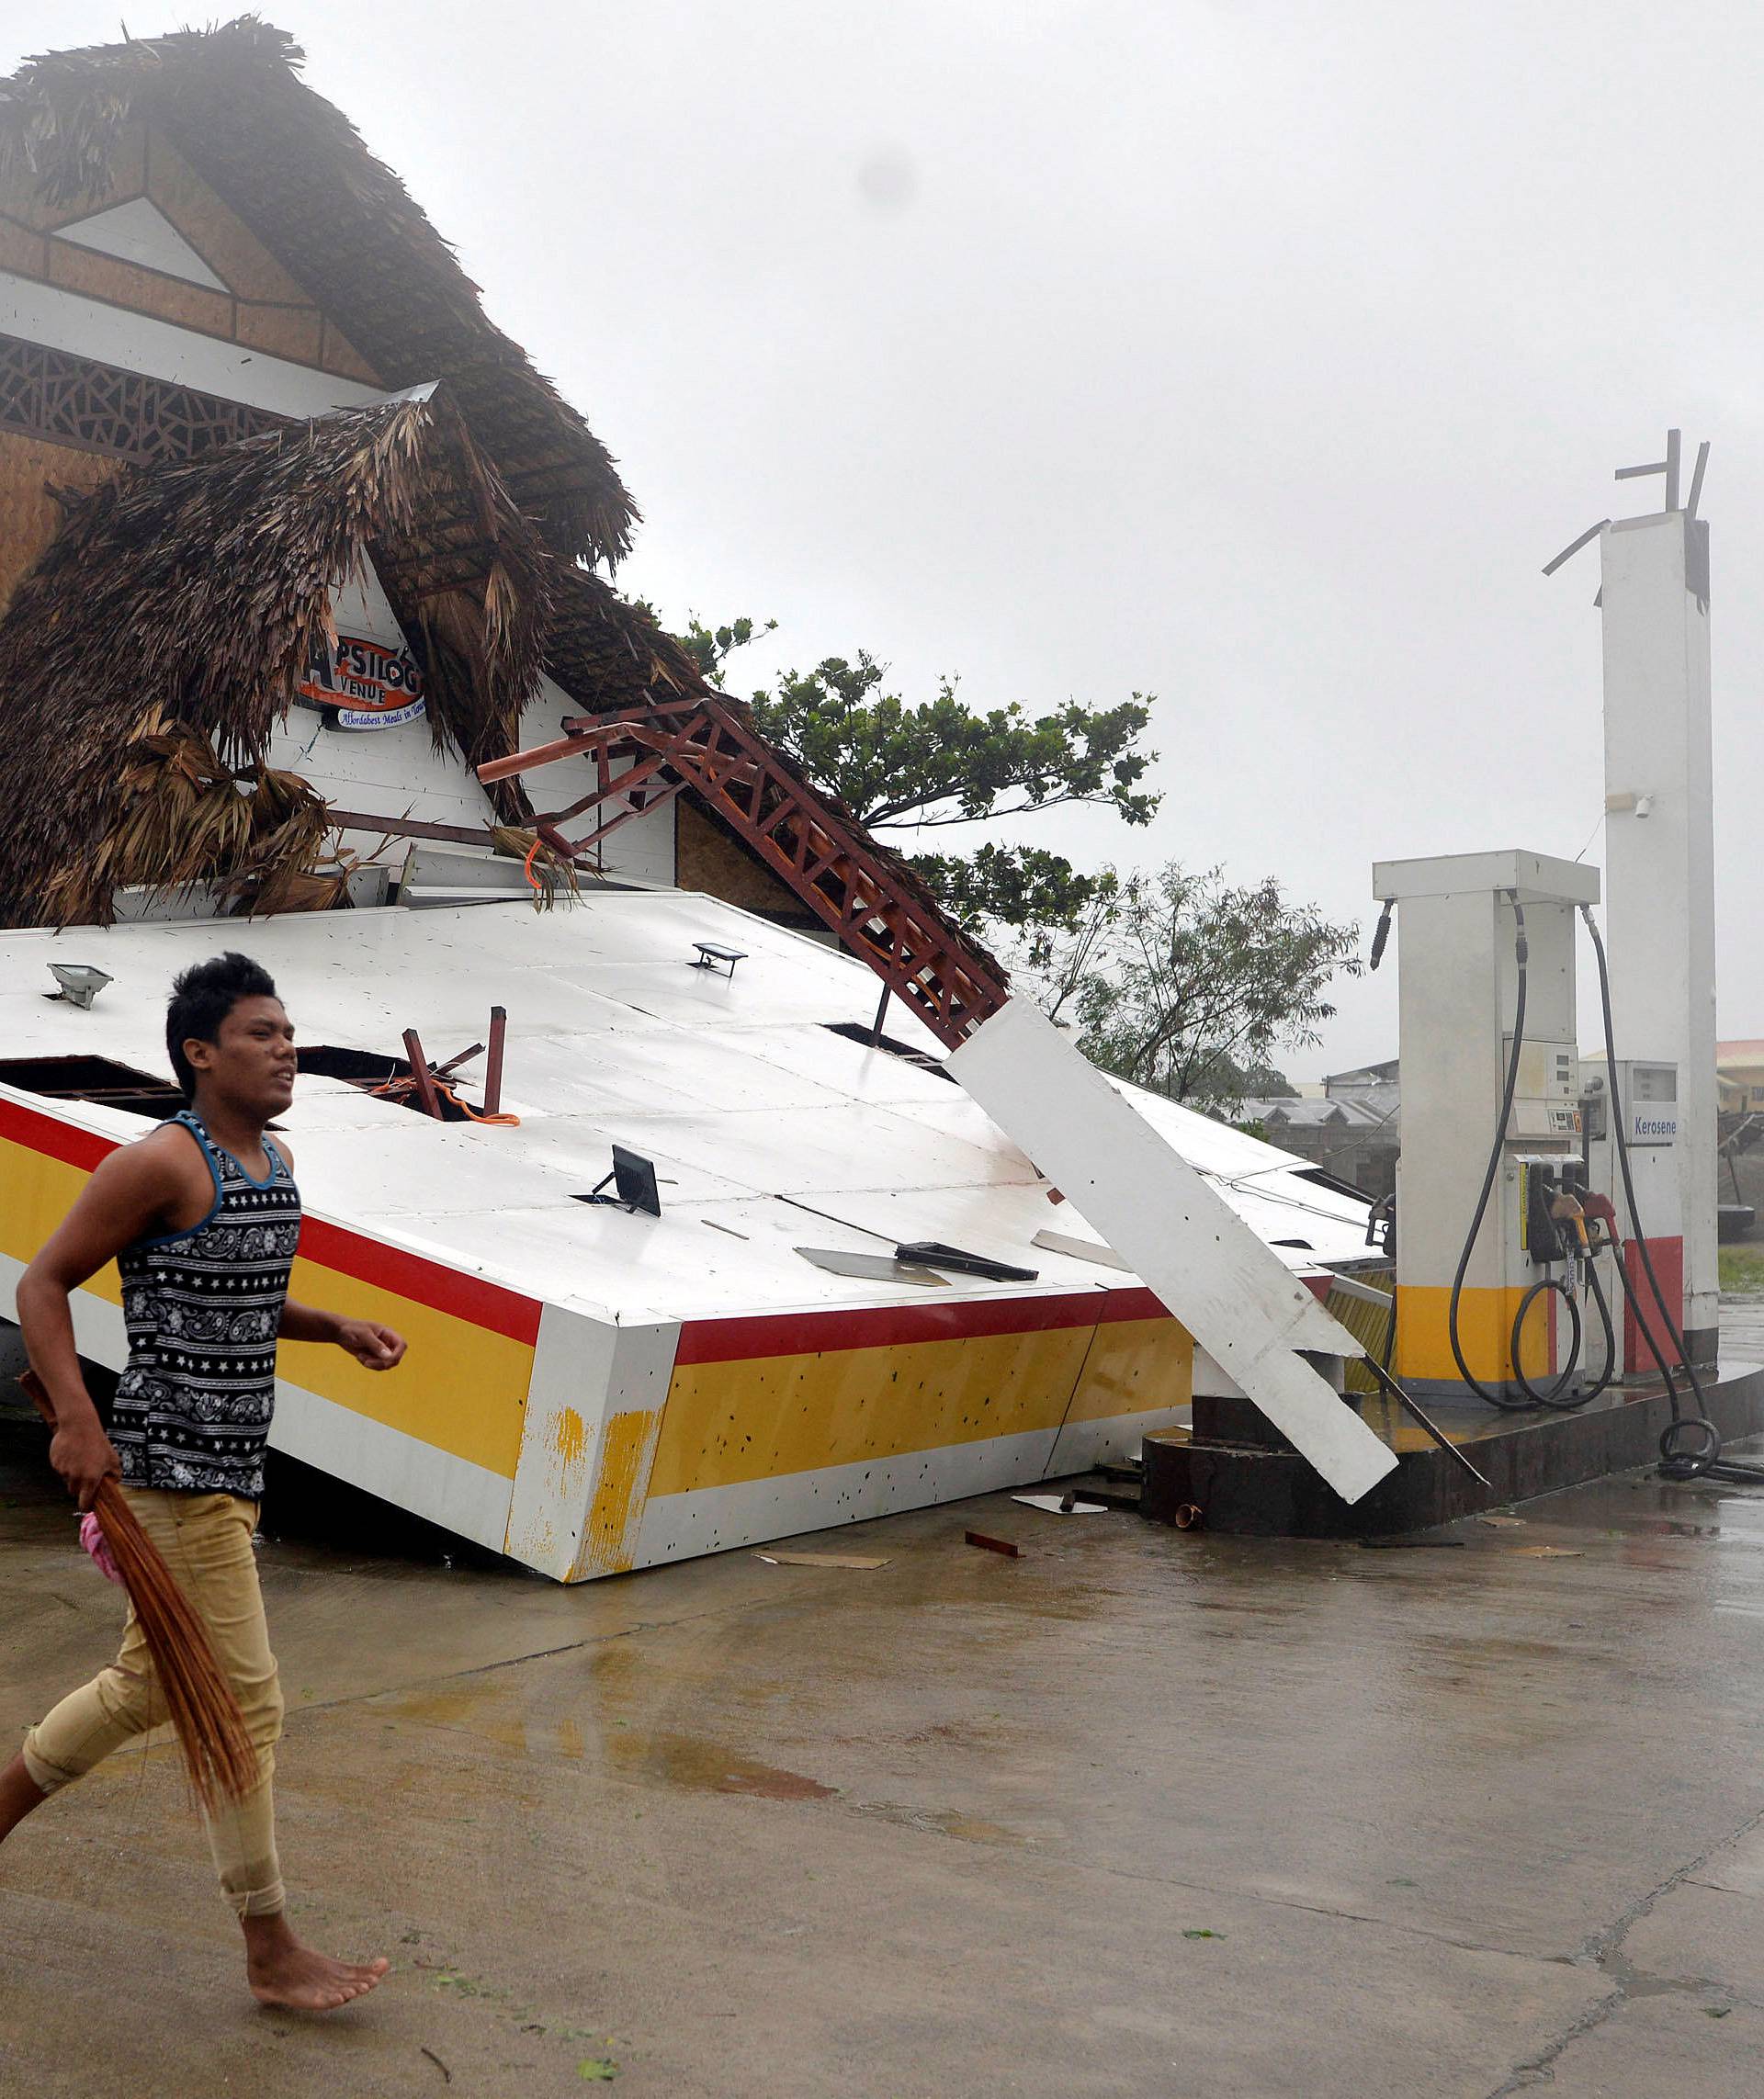 A resident runs past a collapsed roof of a petrol station after Typhoon Haima struck San Nicolas, Ilocos Norte